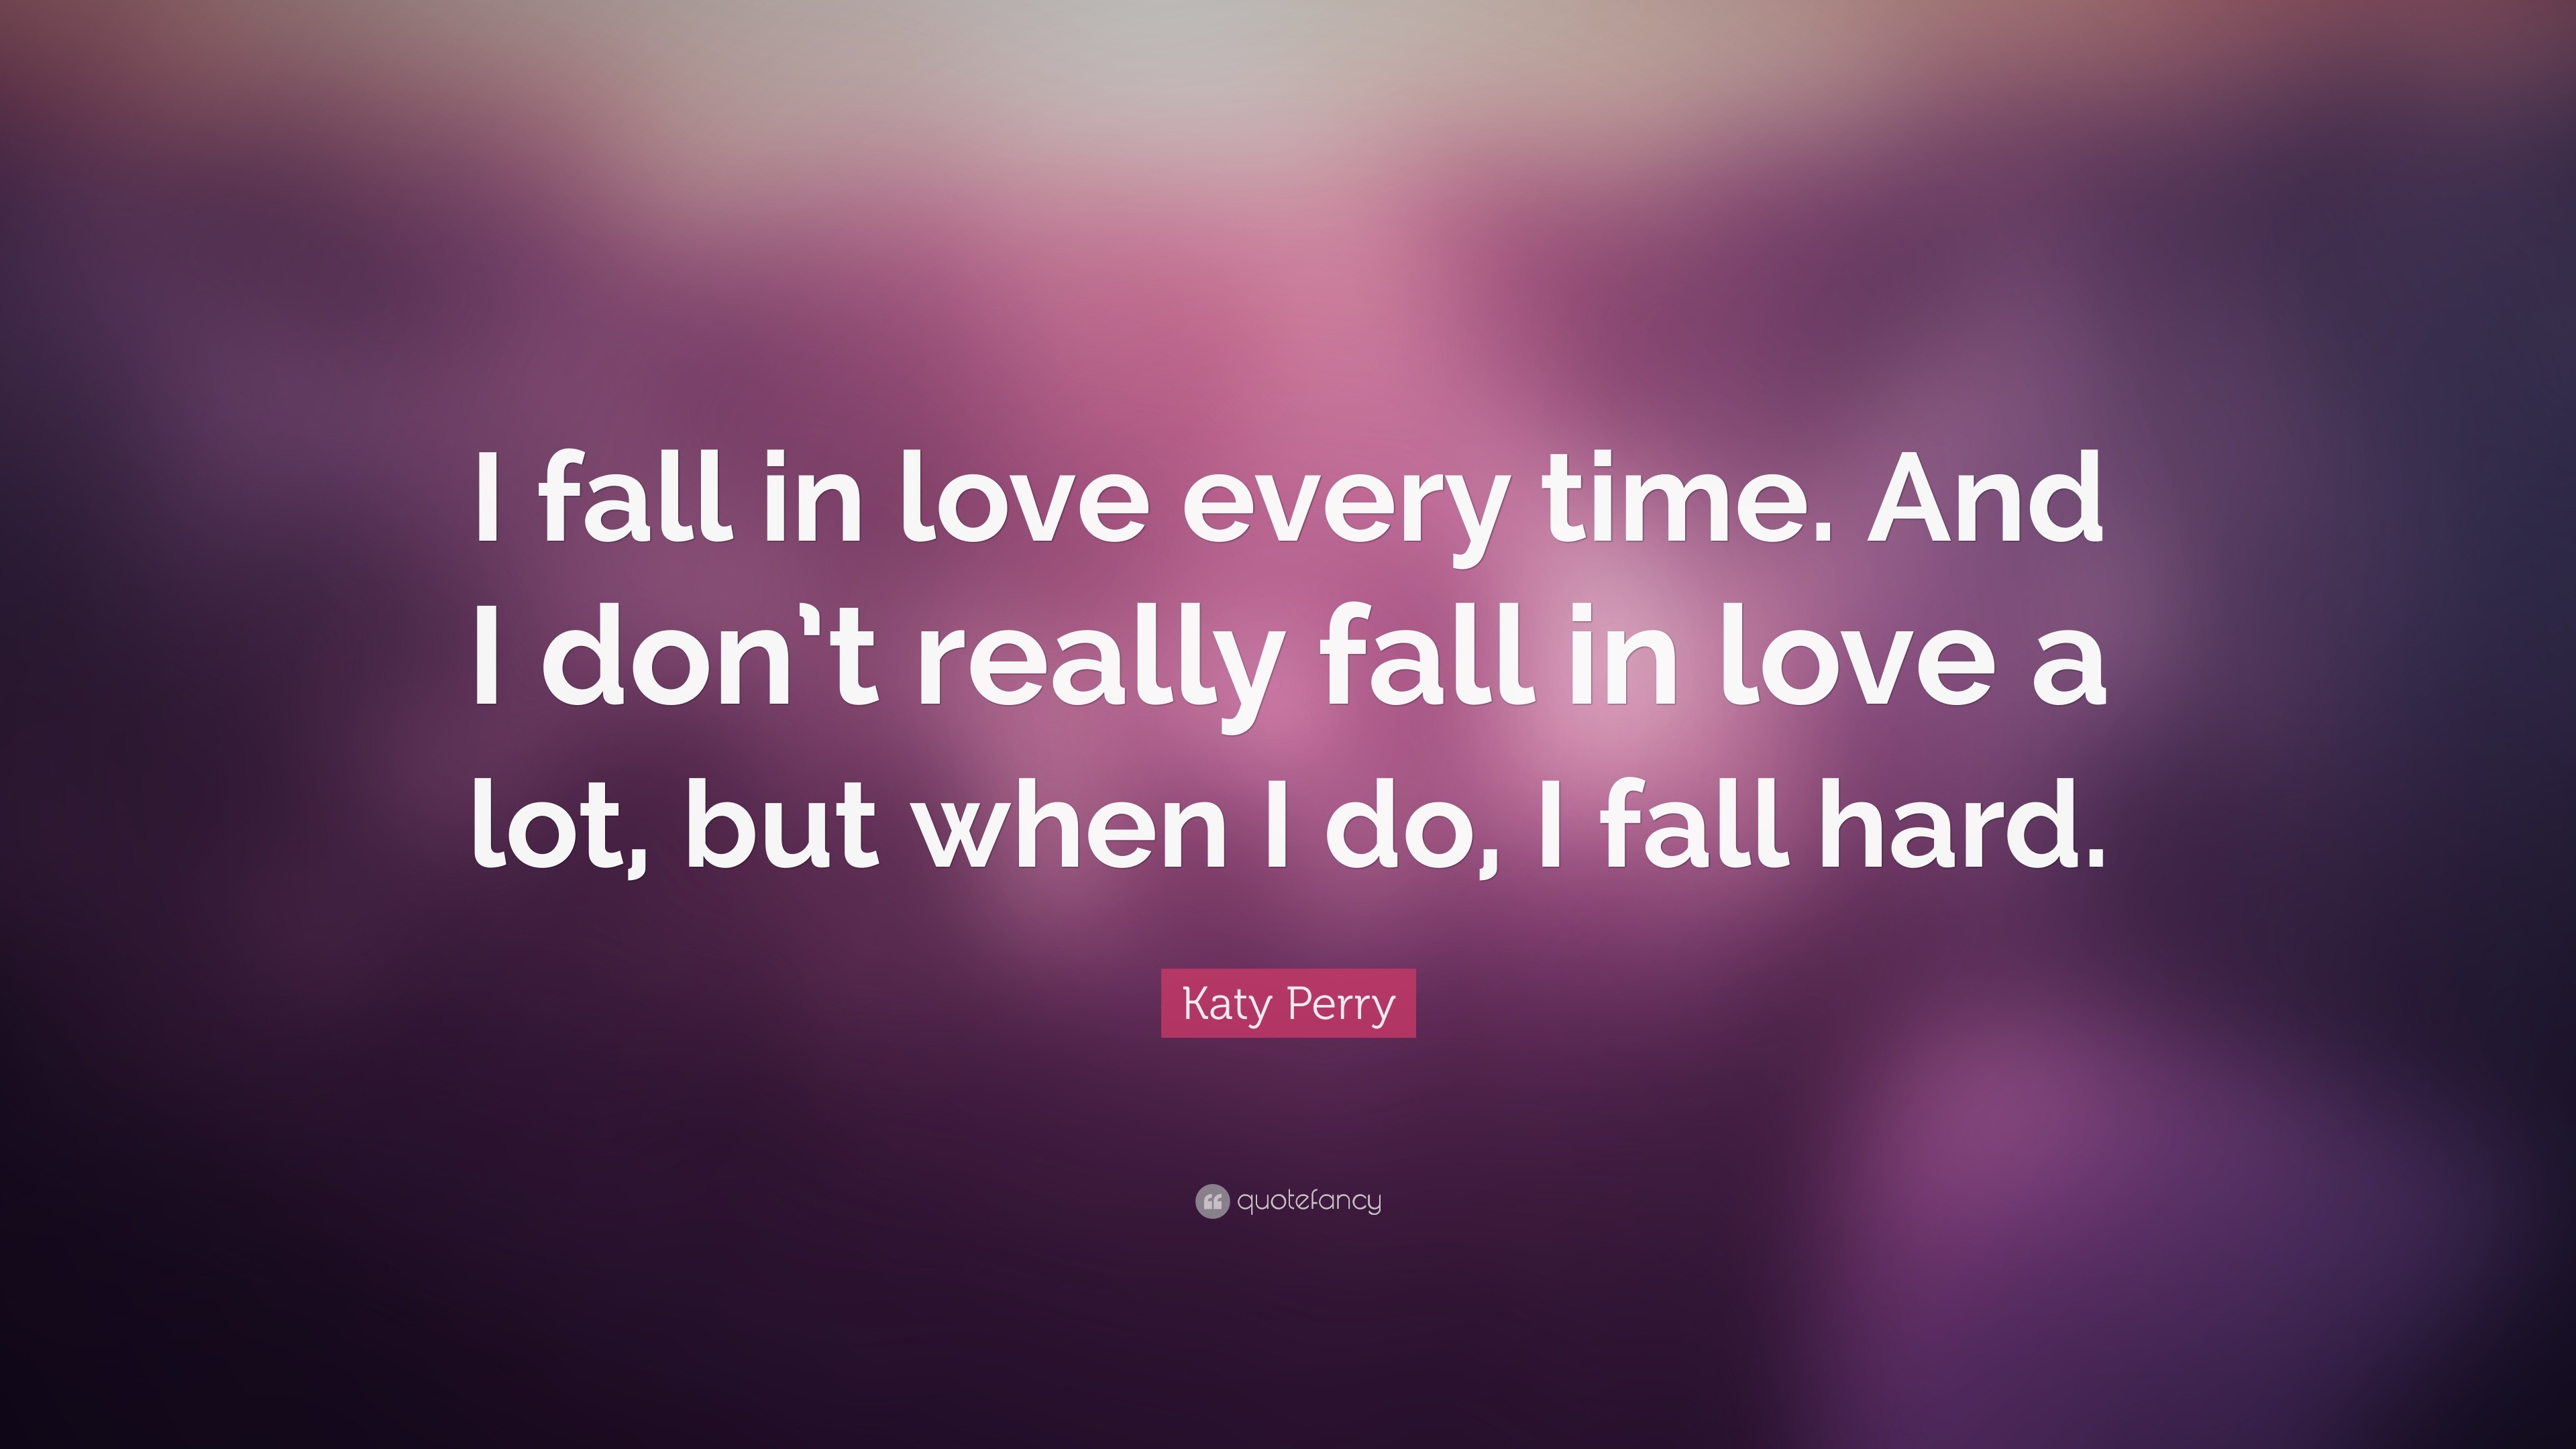 Katy Perry Quote “I fall in love every time And I don